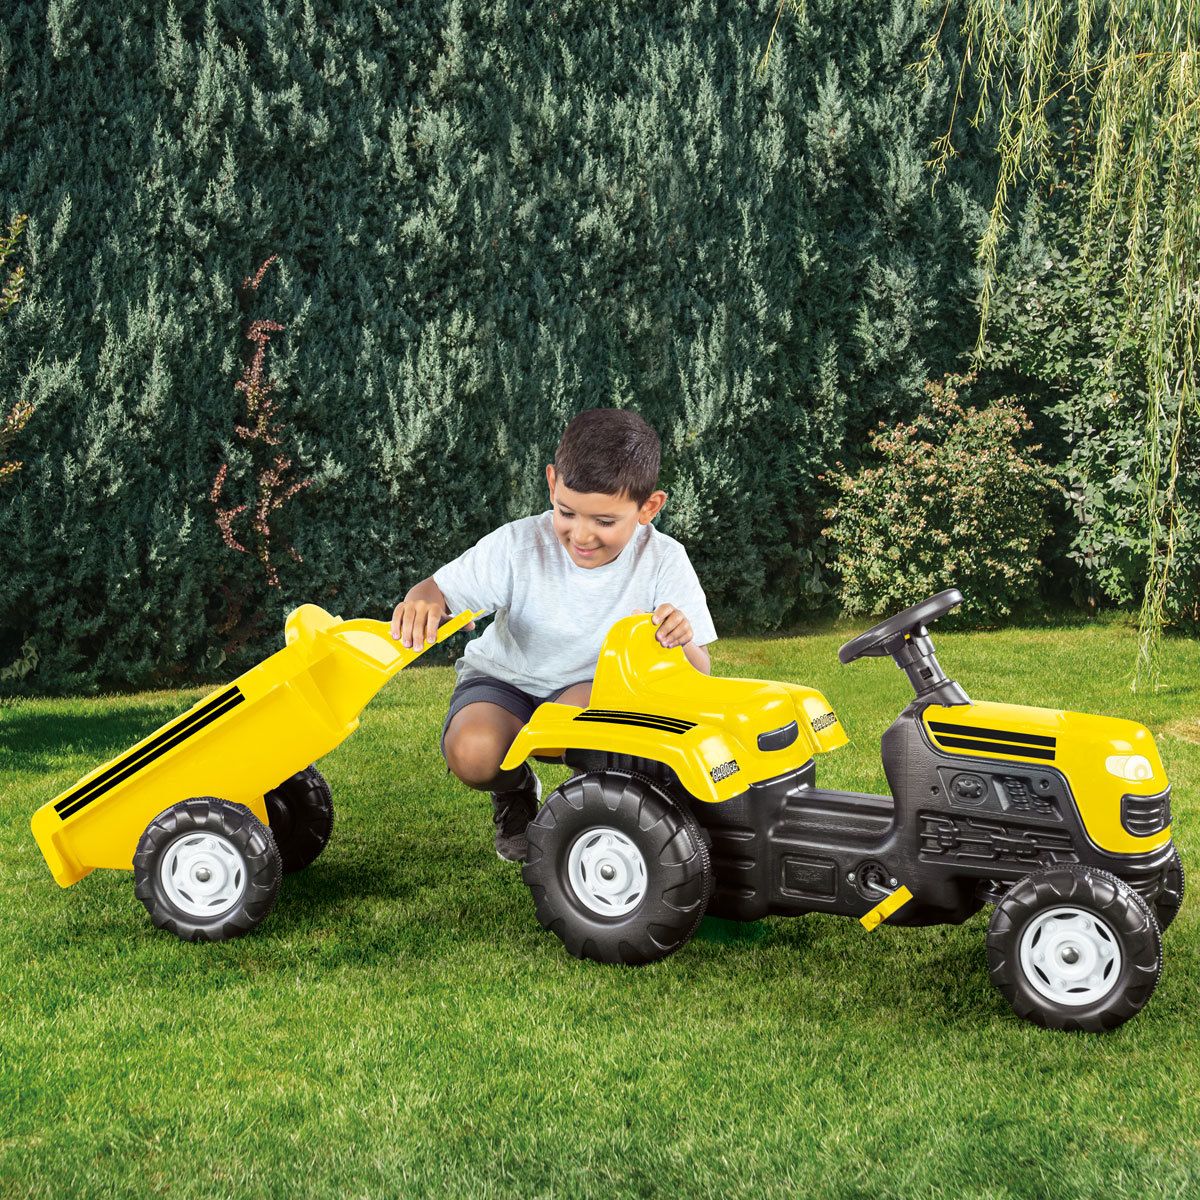 Outdoor ride-on tractor for kids.